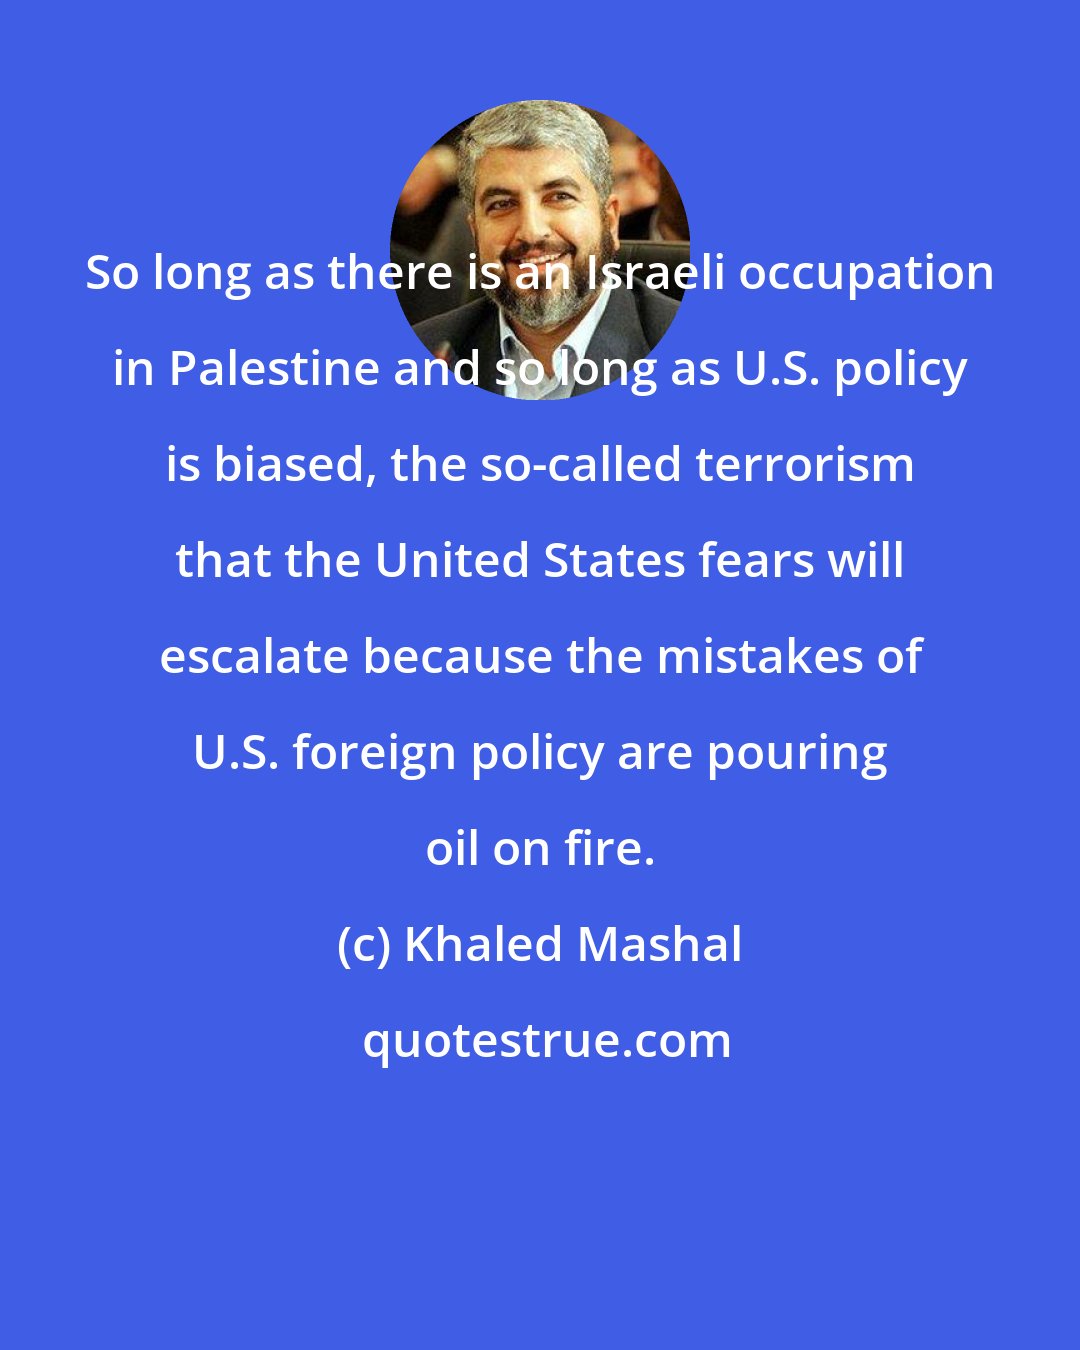 Khaled Mashal: So long as there is an Israeli occupation in Palestine and so long as U.S. policy is biased, the so-called terrorism that the United States fears will escalate because the mistakes of U.S. foreign policy are pouring oil on fire.